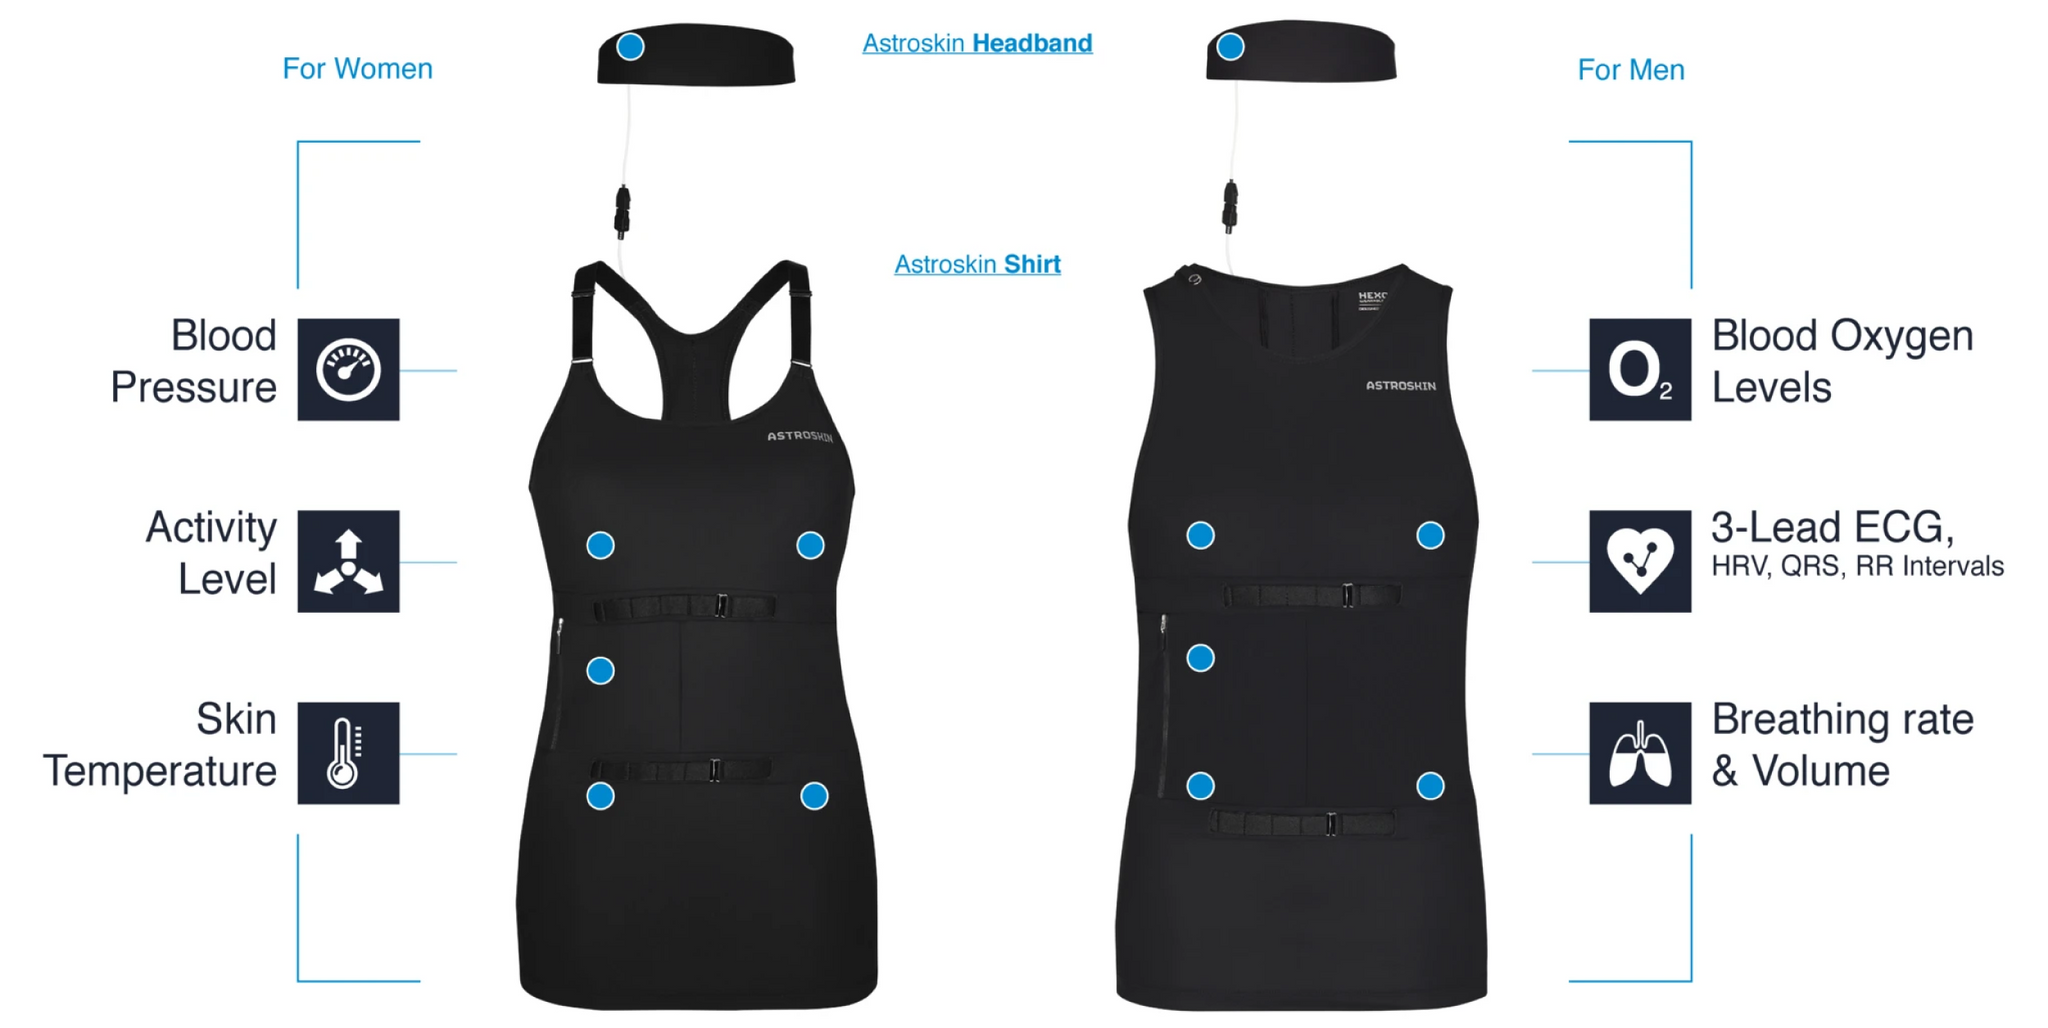 Astroskin Smart Garments - Wearable Technology with Pulse Ox monitor, Heart rate, spO2, PPG, ECG, Blood Pressure, Activity, and the Highest Rated Fitness Tracker